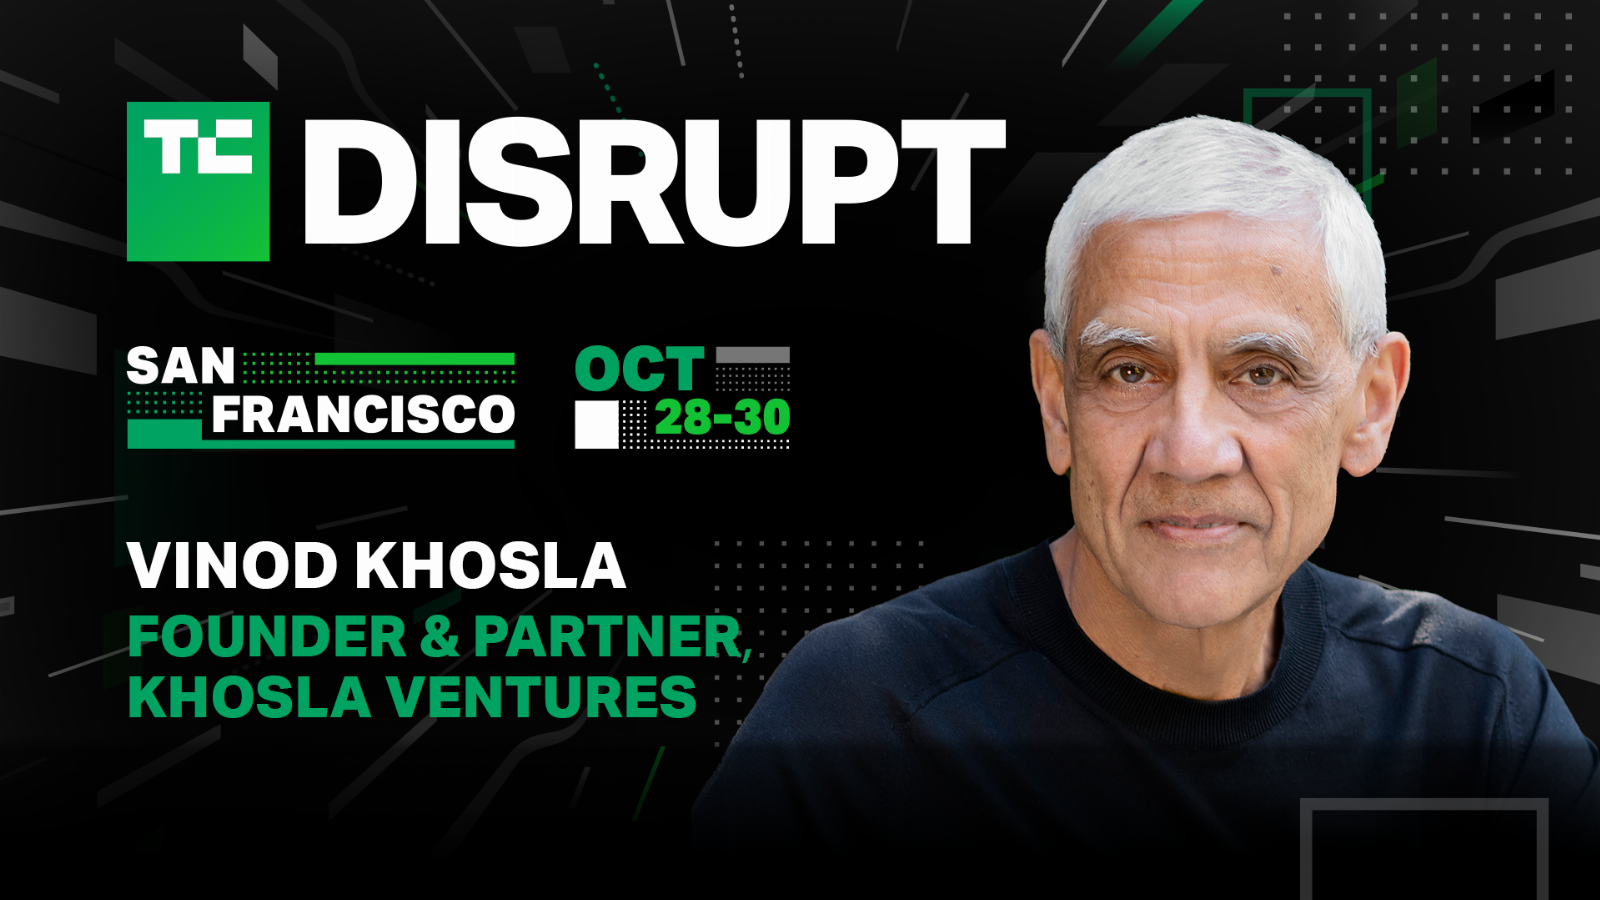 Vinod Khosla is coming to Disrupt to discuss how AI might change the future